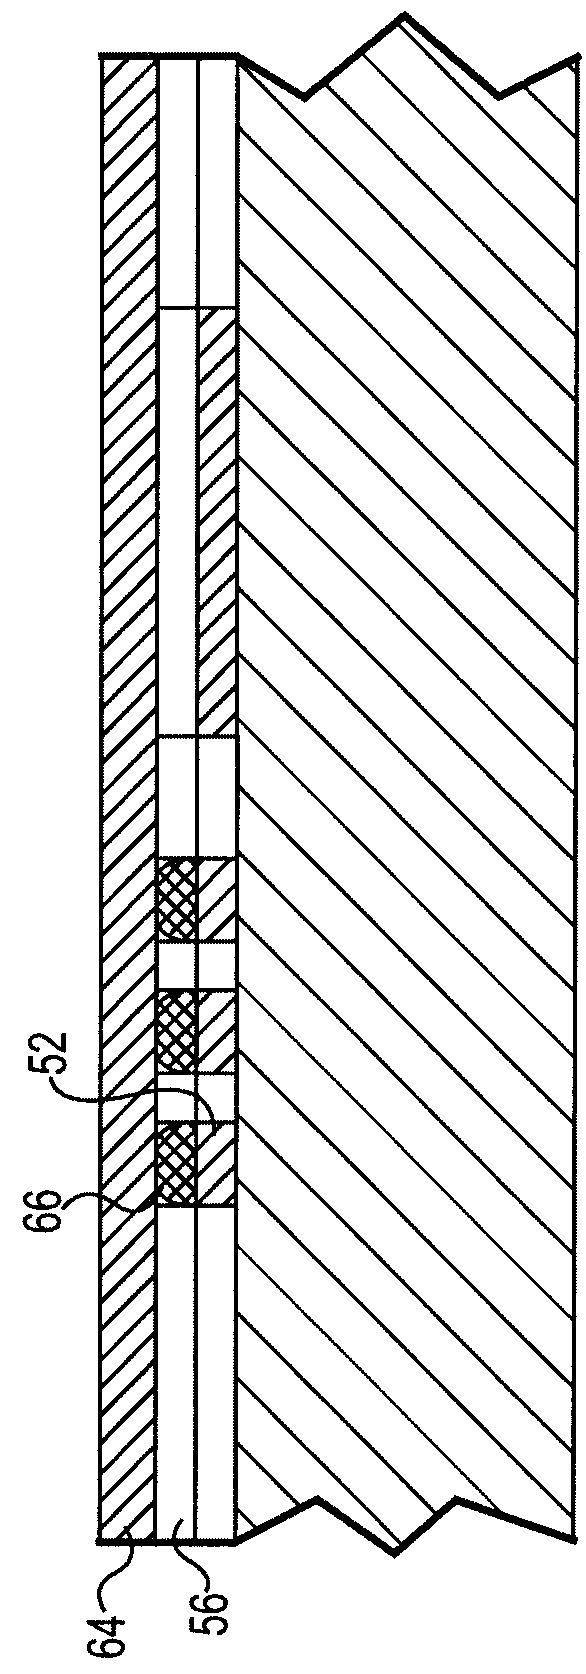 High performance electrical circuit structure